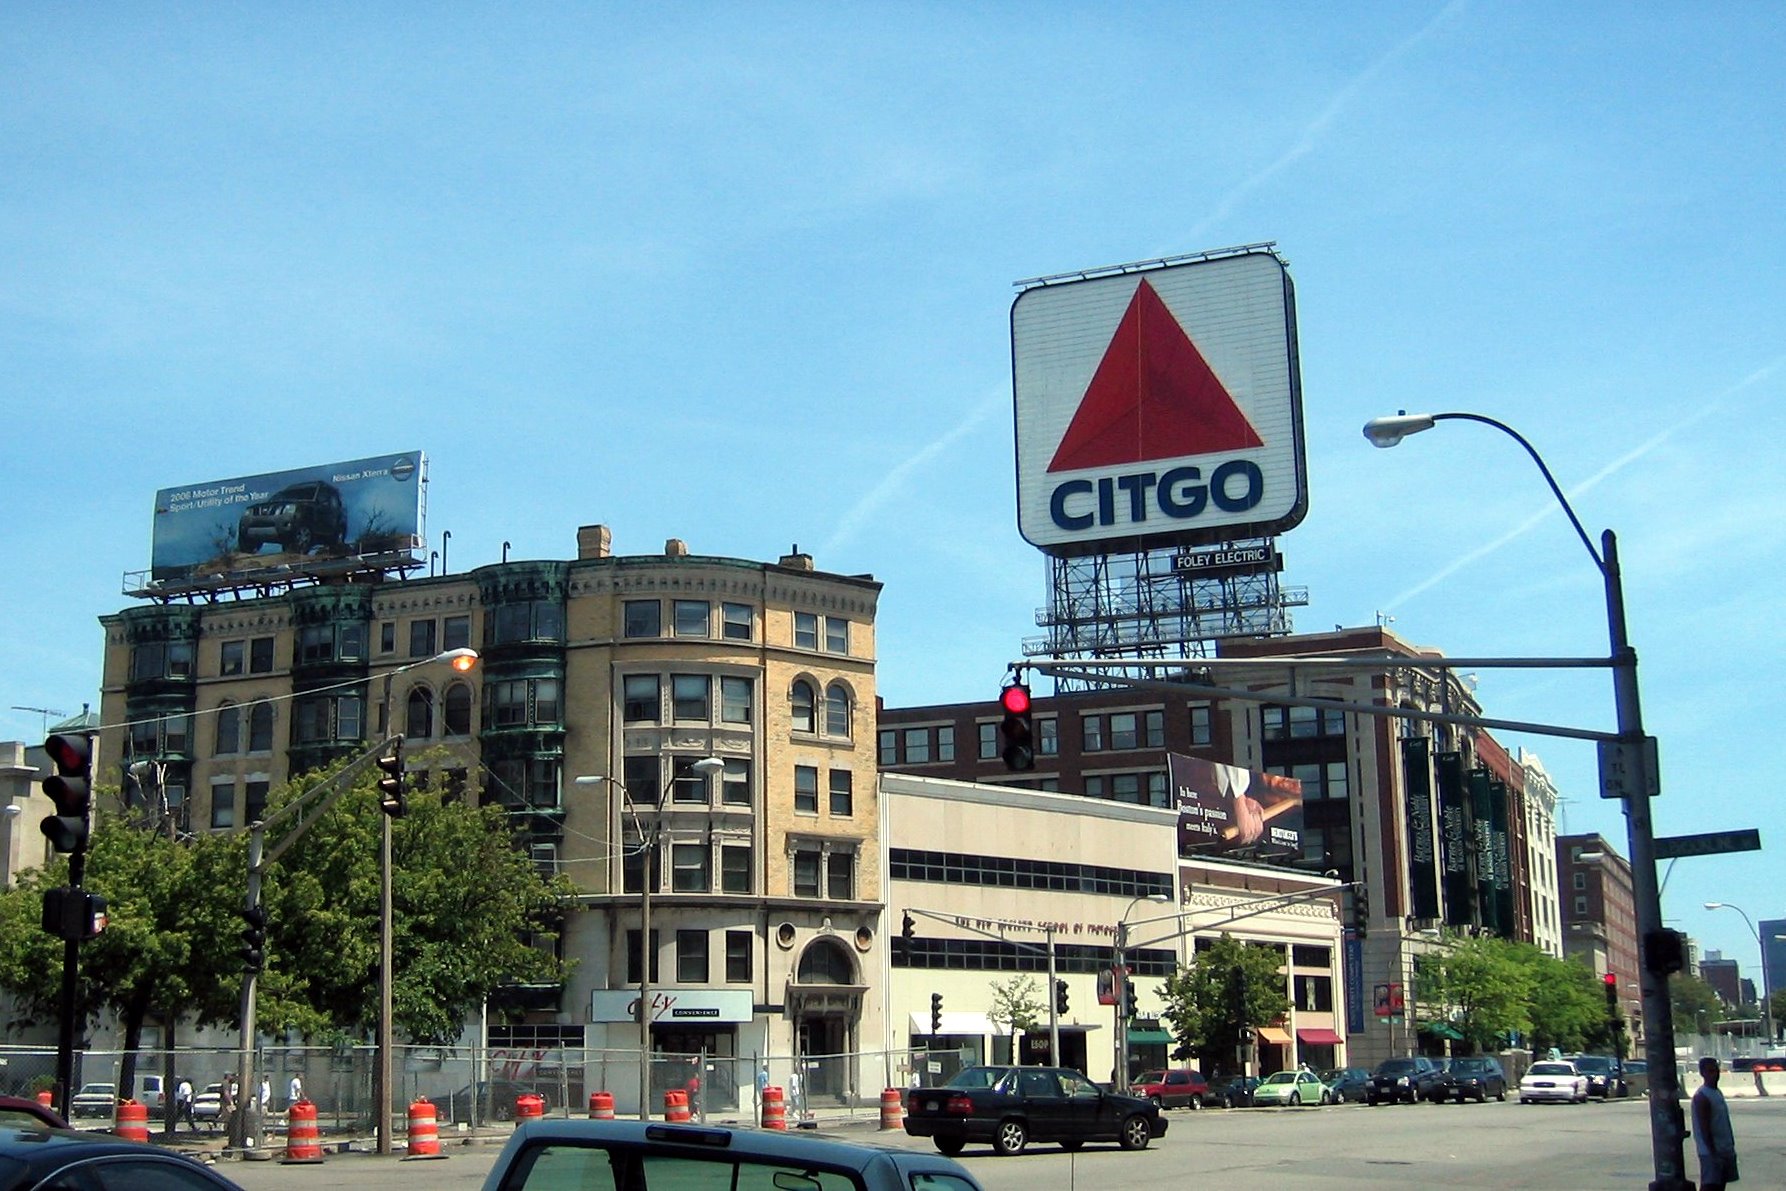 Boston - Kenmore Square: Citgo Kenmore Square exists at the intersection of several Beacon Street, Commonwealth Avenue and Brookline Avenue, abutting Boston University and serving as a transportation hub for nearby Landsdowne Street and Fenway Park. The large, double-faced sign featuring the Citgo "trimark" logo has become a landmark, partly because of its visibility over the Green Monster during televised Red Sox games. The current 60 ft x 60 ft incarnation, unveiled in March 2005 after a six-month restoration project, features thousands of light-emitting diodes (LEDs). LEDs were selected for their durability, energy efficiency, intensity, and ease of maintenance. Earlier versions featured neon lighting; the previous sign contained some 5,878 glass tubes with a total length of over five miles. The first sign, featuring the Cities Service logo, was built in 1940, and replaced with the trimark in 1965. In 1979 Governor Edward J. King ordered it turned off as a symbol of energy conservation. Four years later, Citgo attempted to disassemble the weatherbeaten sign, and was surprised to be met with widespread public affection for the sign and protest at its threatened removal. The Boston Landmarks Commission ordered its disassembly postponed while the issue was debated. While never formally declared a landmark, it was refurbished and relit by Citgo in 1983 and has remained in operation ever since. Citgo is now a subidiary of Petróleos de Venezuela S.A. and in 2006, Jerry McDermott, a Boston city councillor, proposed that the sign be removed in response to Venezuelan President Hugo Chavez's insults toward America . McDermontt also suggested draping an American flag or Boston Red Sox banner over the sign until Chavez is out of office.